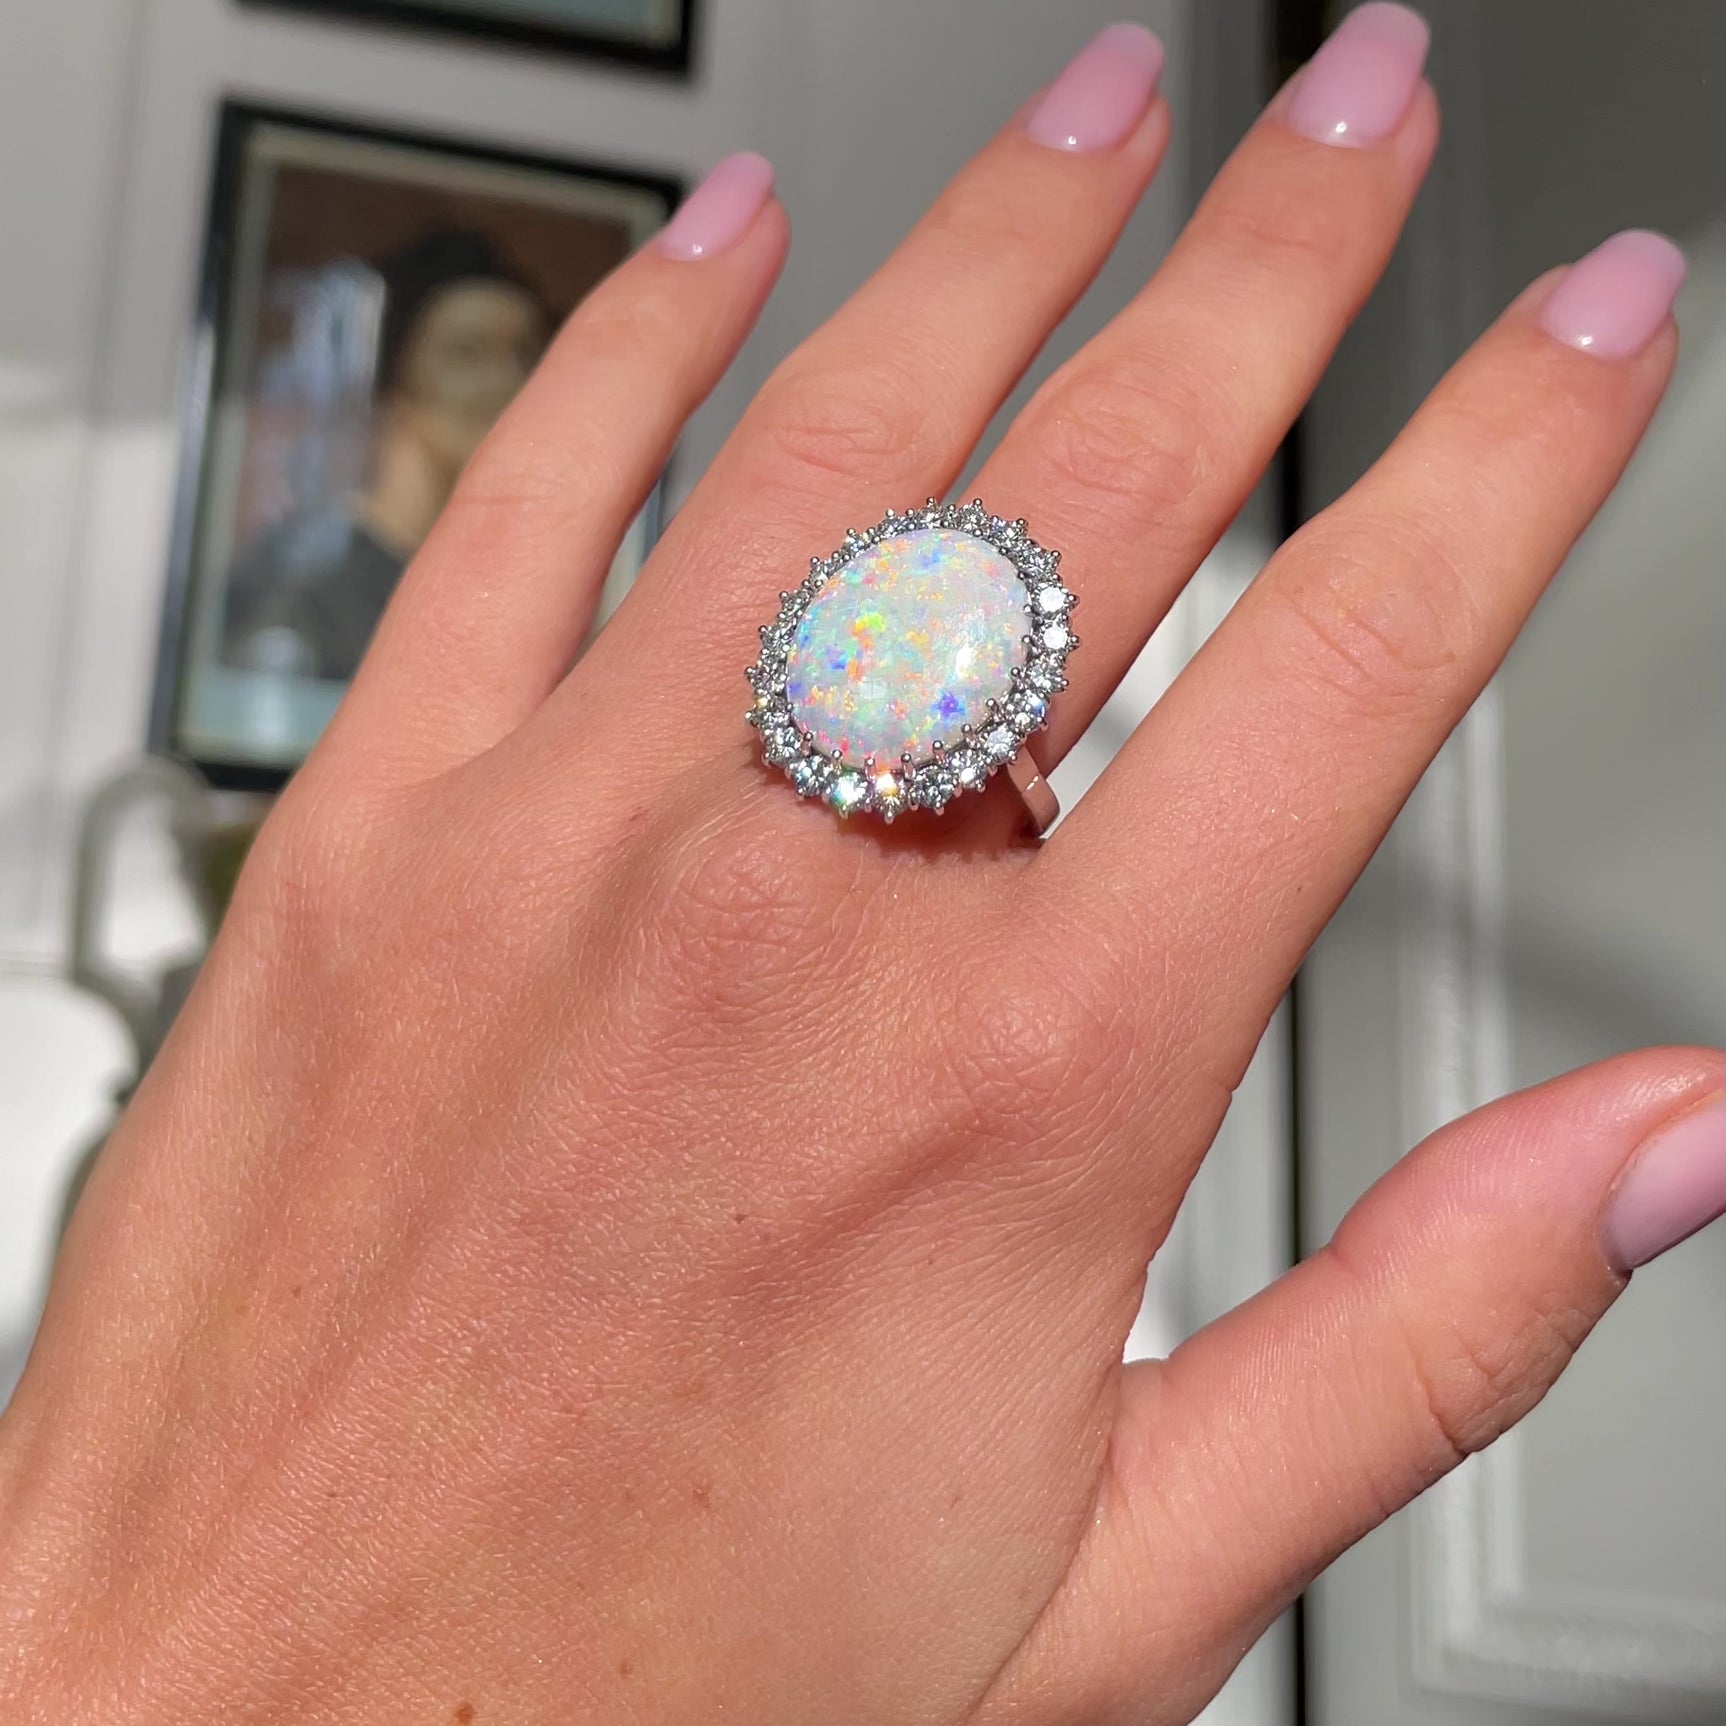 White opal and diamond cluster ring, worn on hand and rotated to give perspective.